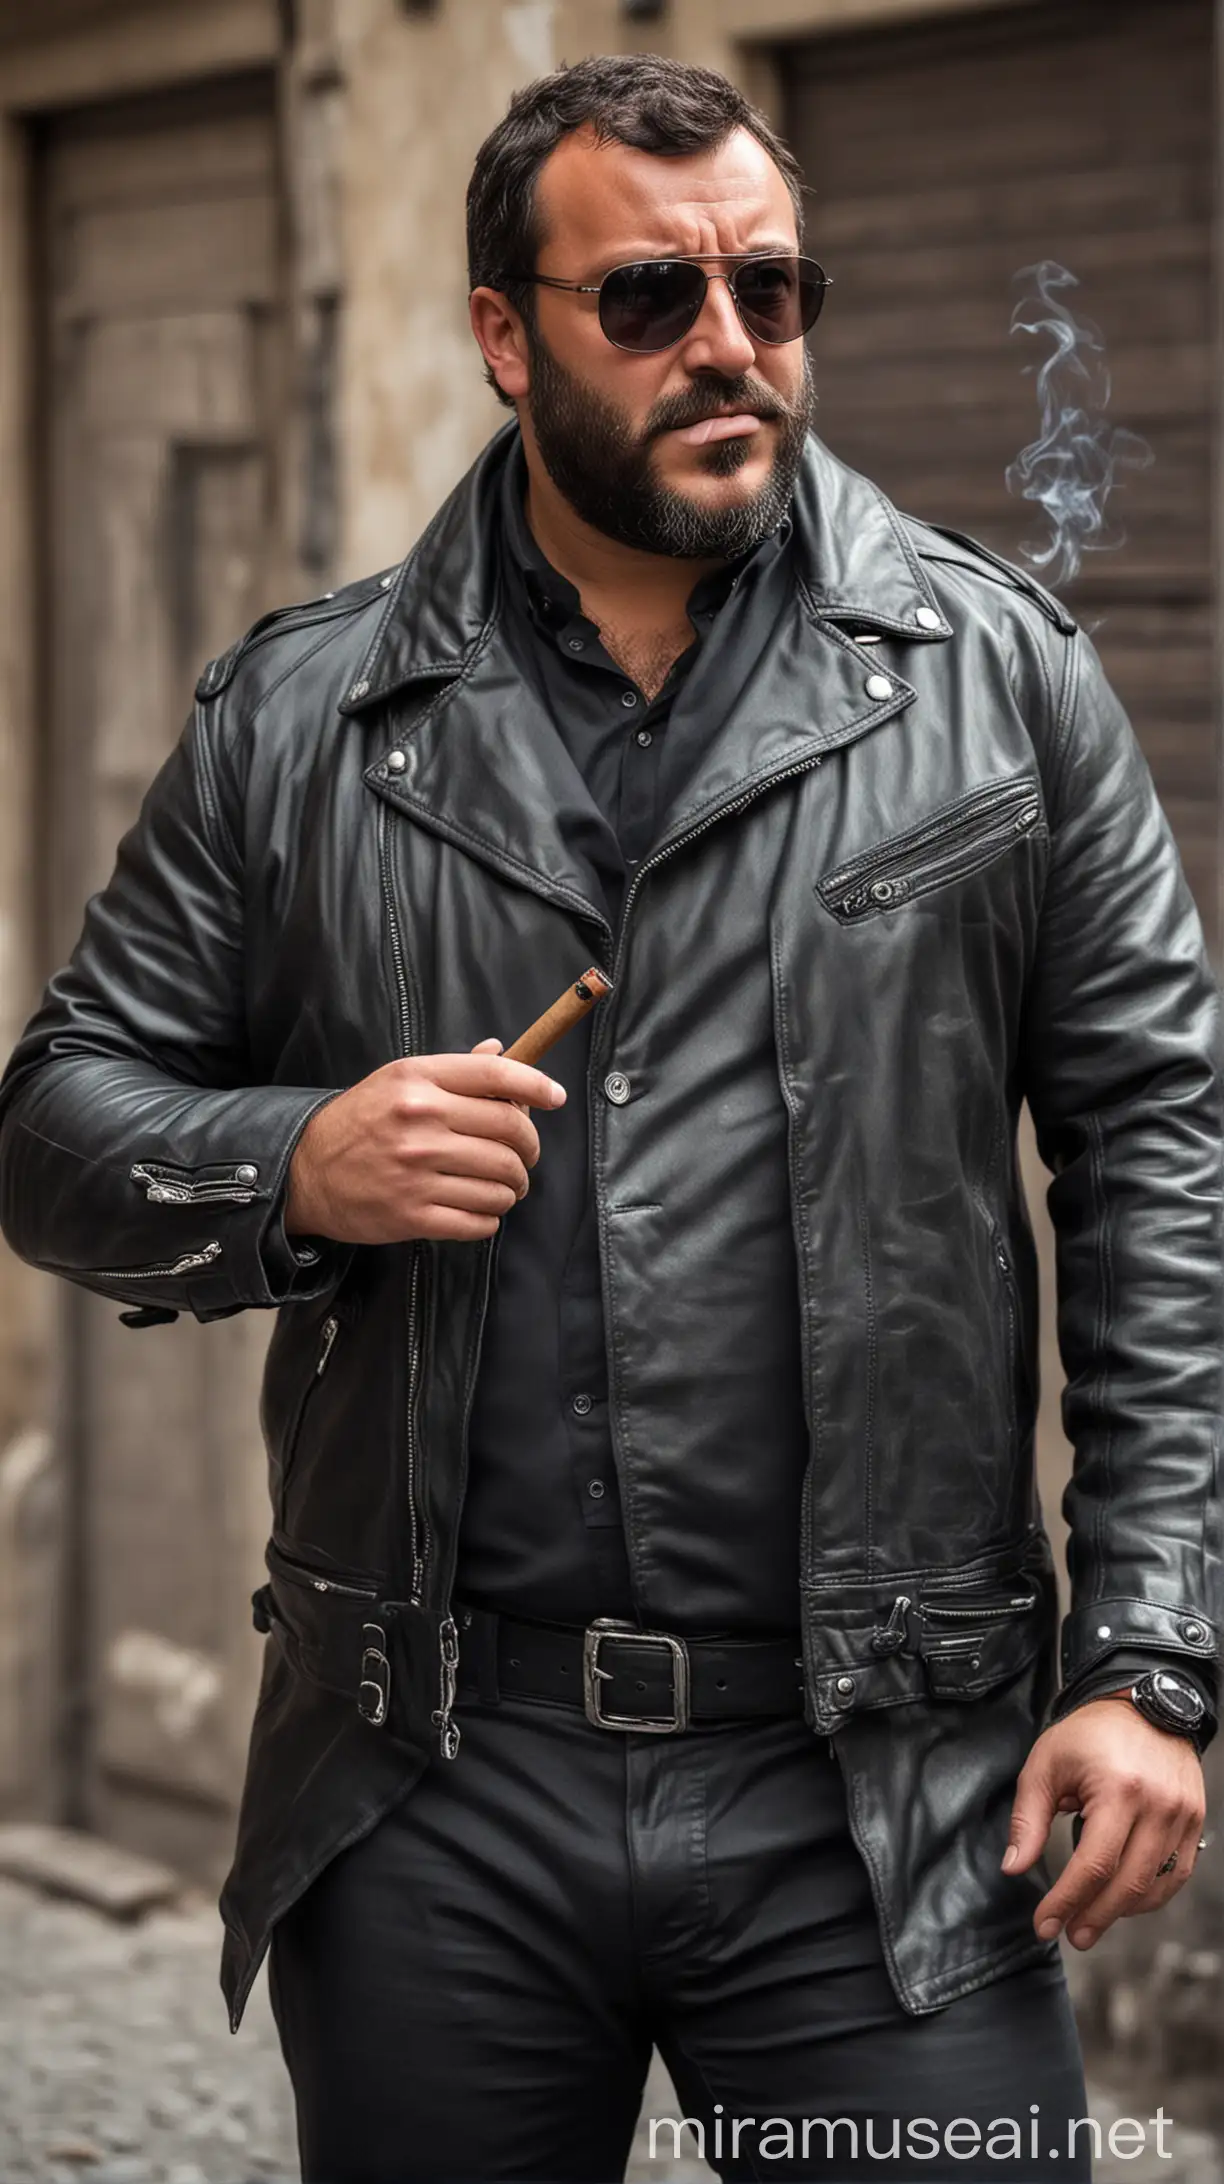 Muscular Matteo Salvini Smoking Cigar in Biker Style Leather Outfit